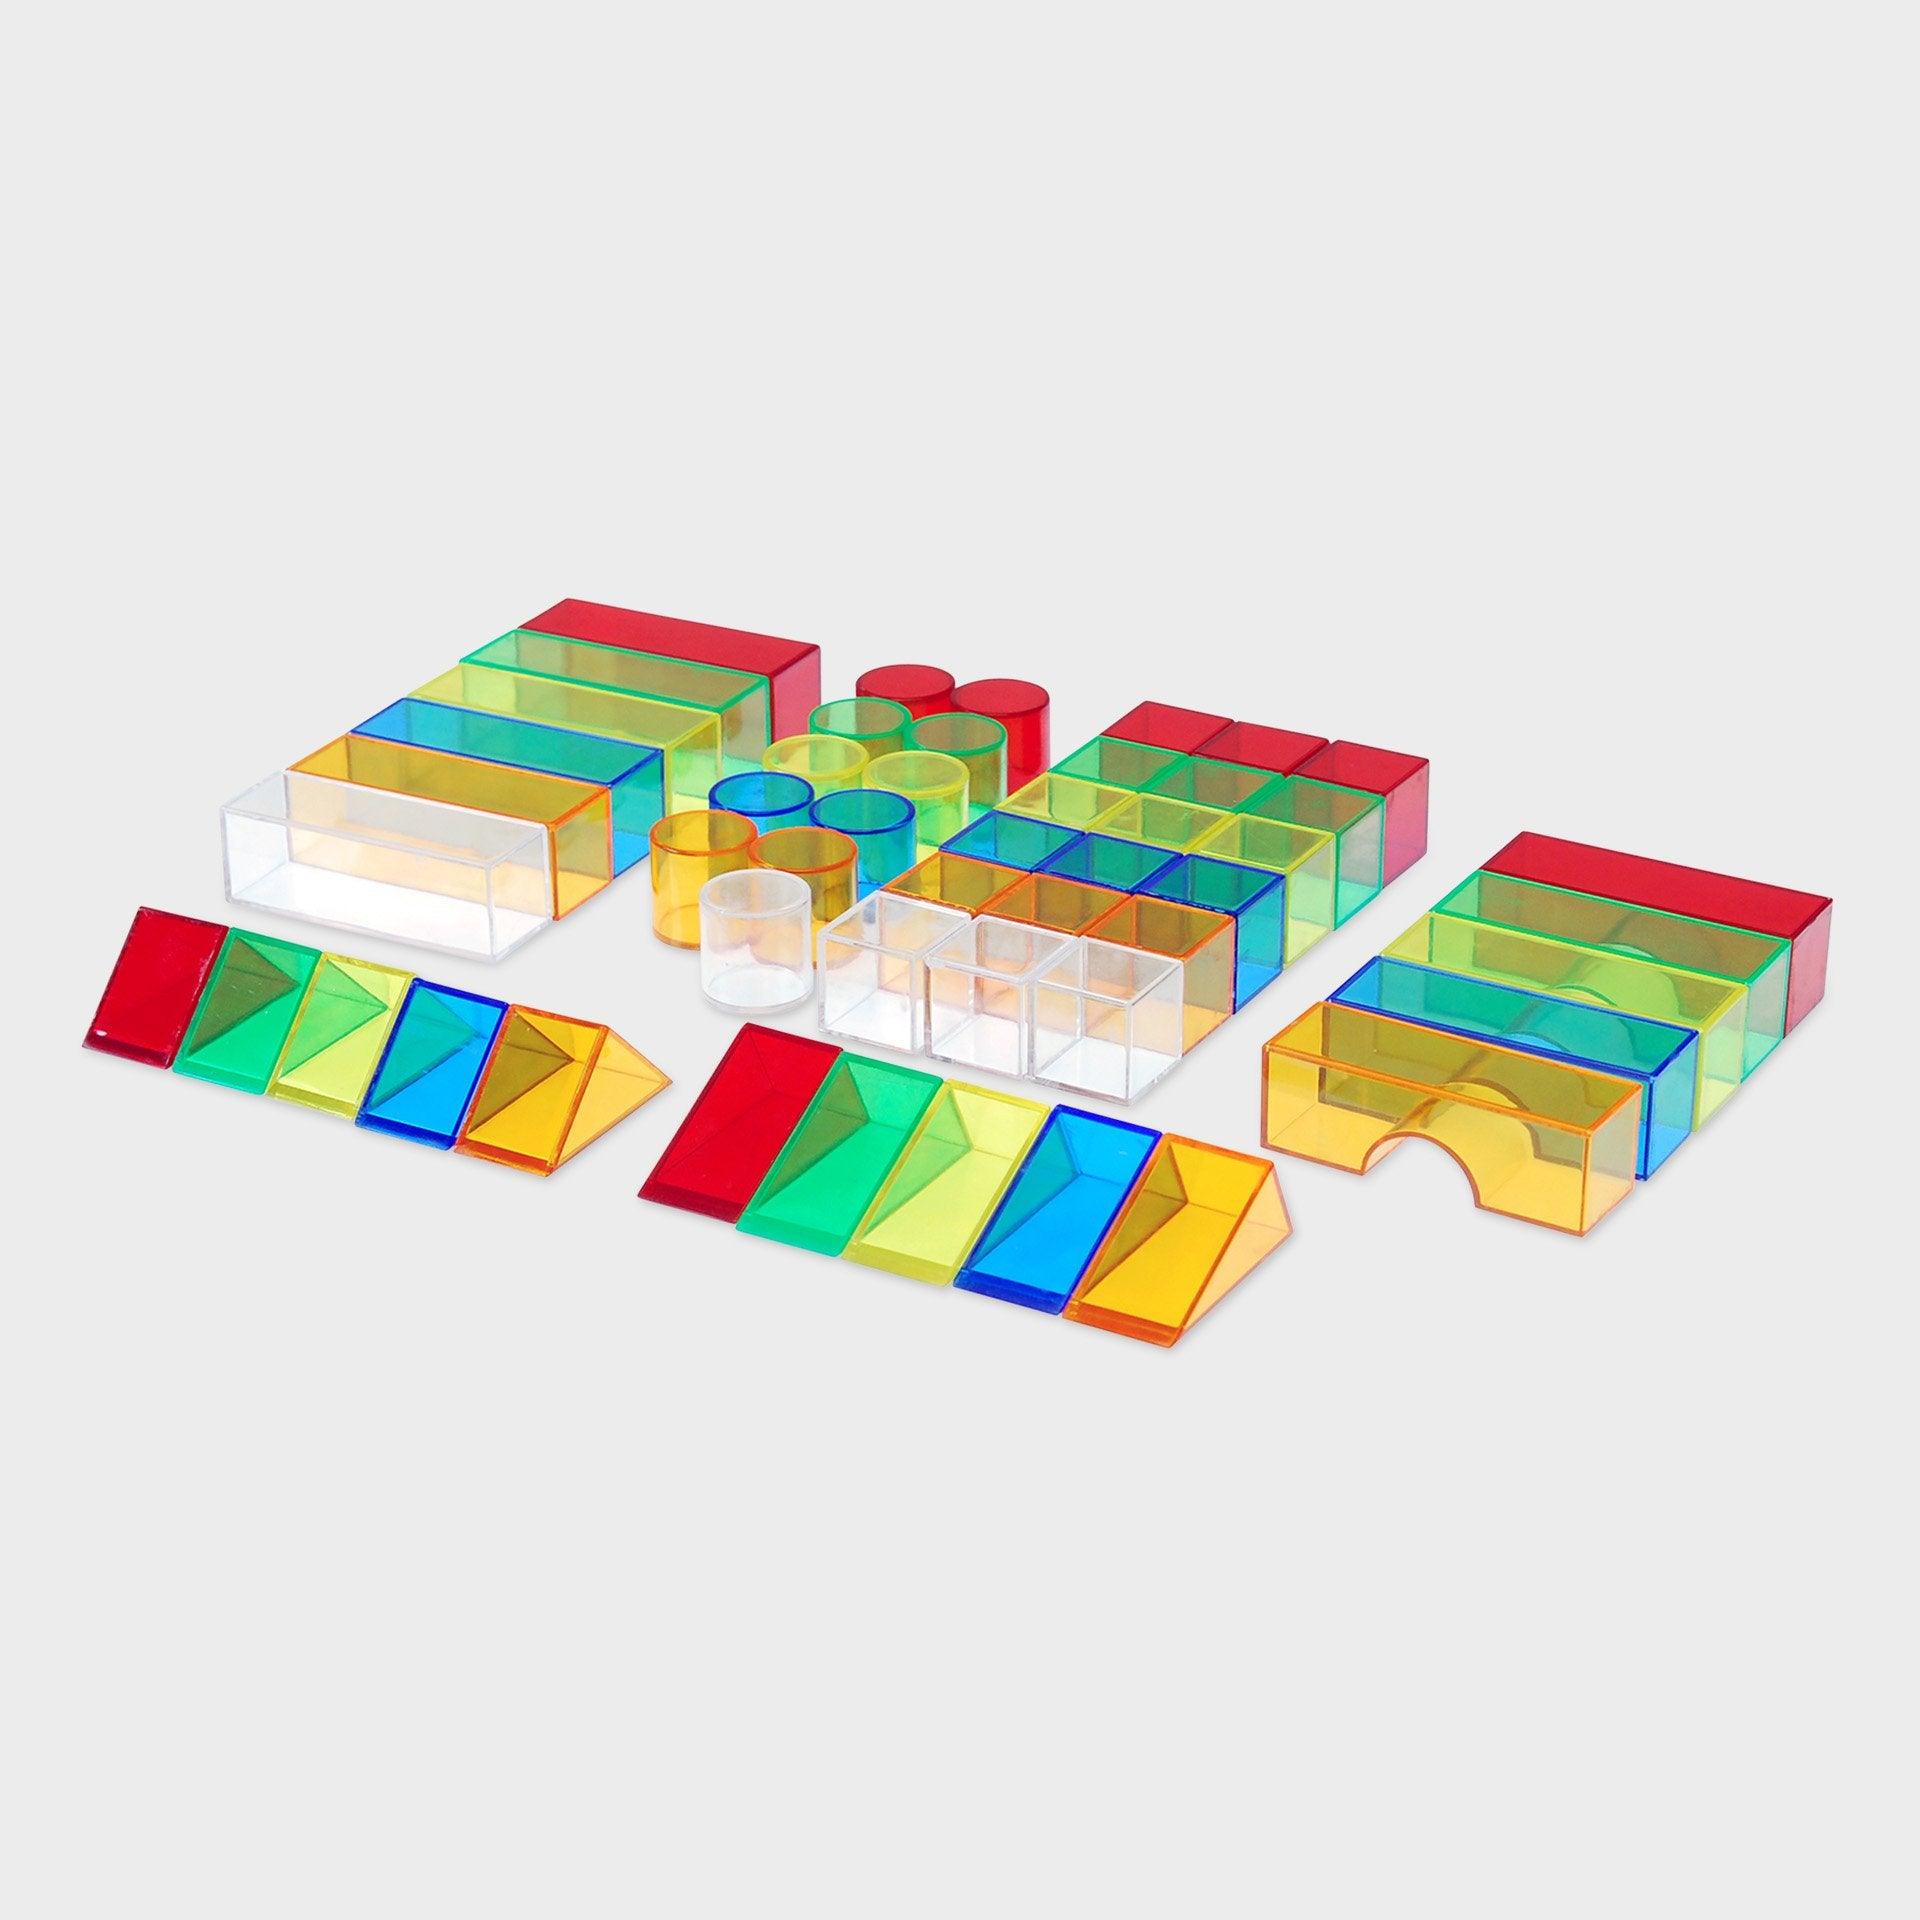 Translucent Colour Blocks, TickiT® Translucent Colour Blocks is a set of colour acrylic 3D building blocks in six shapes, perfect for use on a light panel where towers and structures look even more impressive with the light shining through the colourful buildings! The Translucent Colour Blocks are ideal for developing fine motor skills through construction and encouraging imaginative play. The Translucent Colour Blocks set includes circular and rectangular pillars, triangular prisms, cubes and bridges. The 